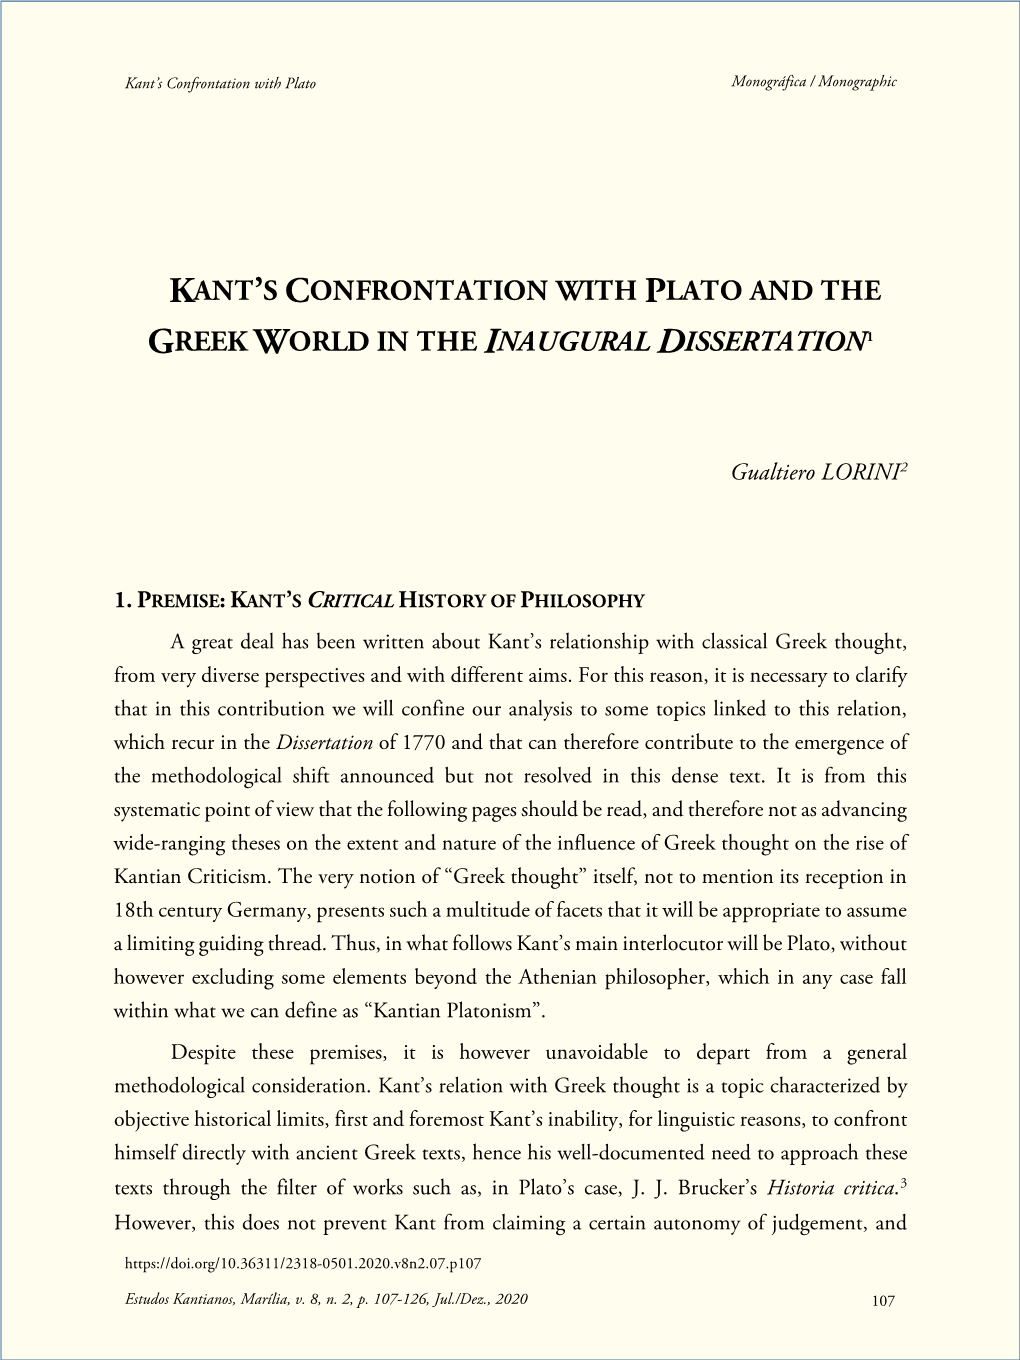 Kant's Confrontation with Plato and the Greek World